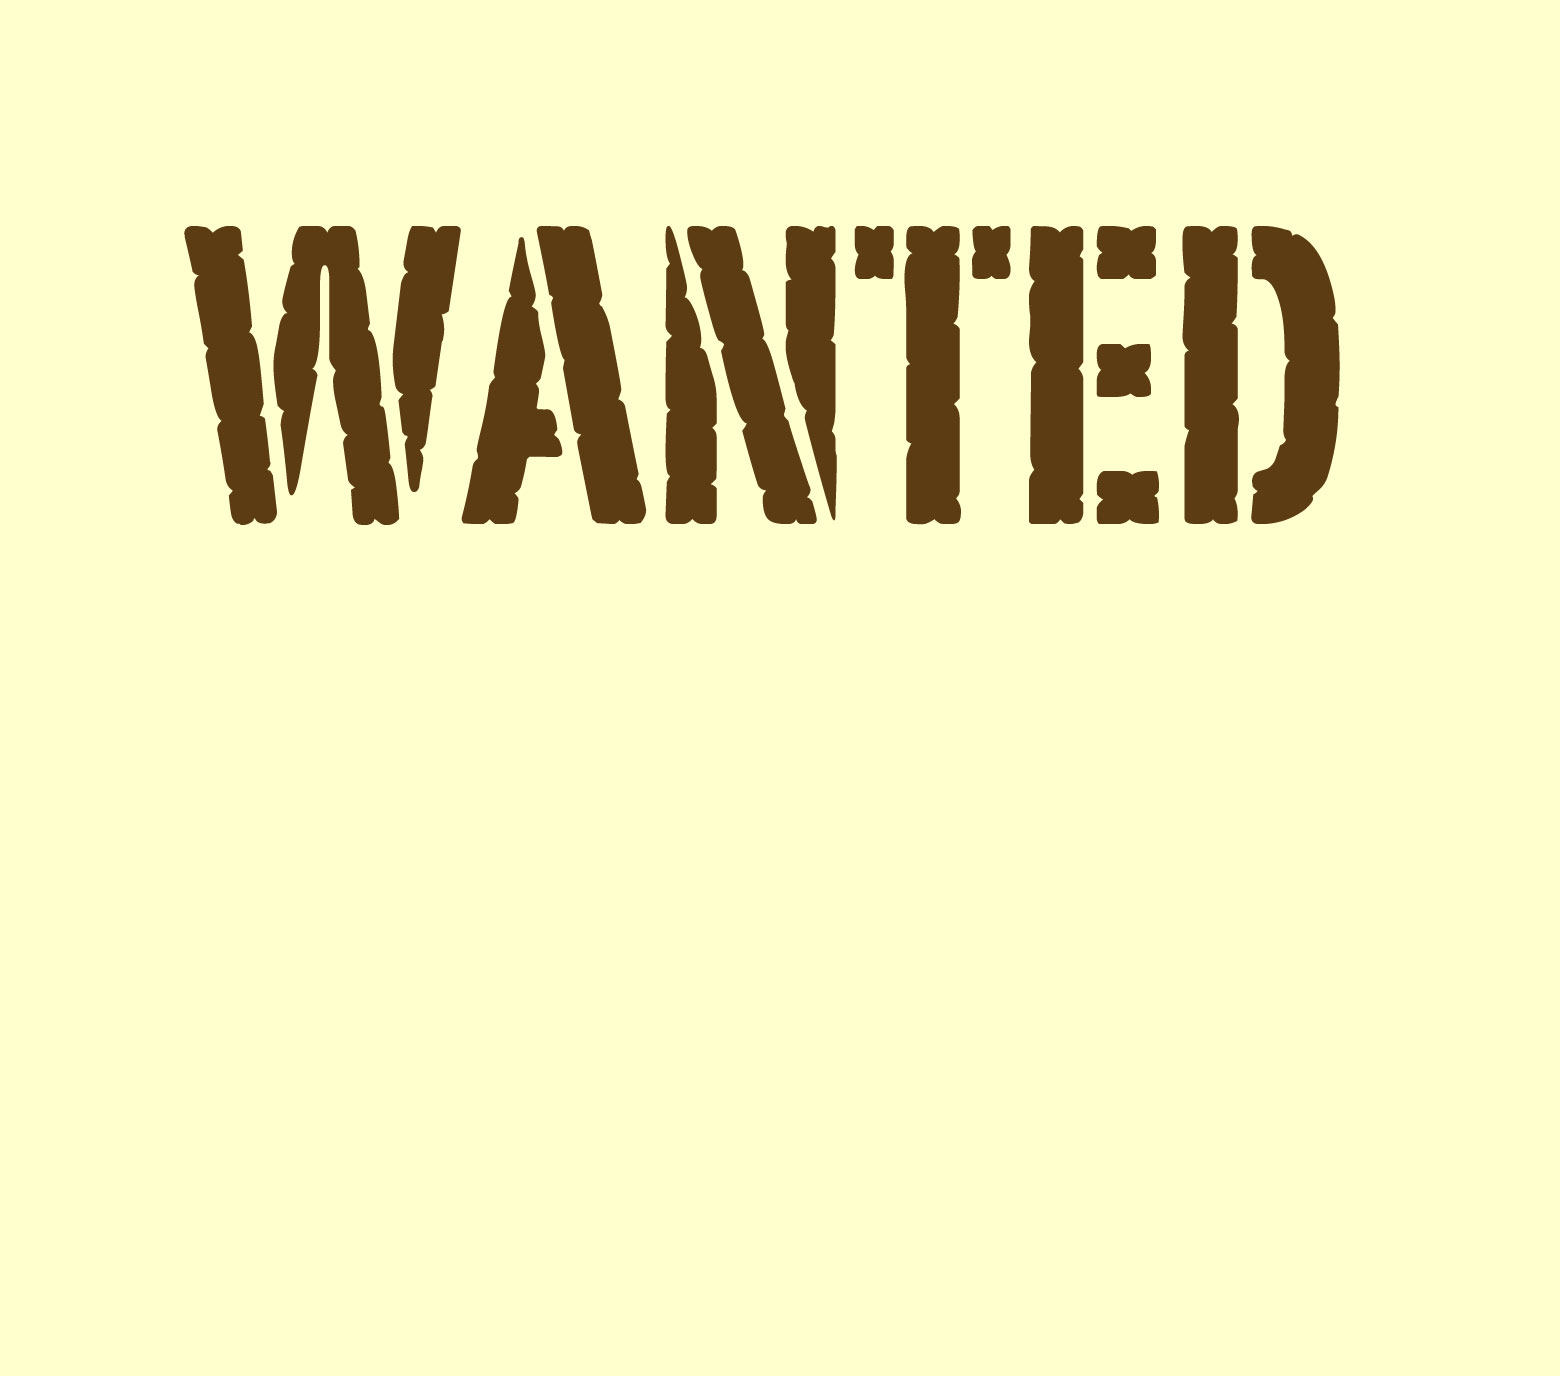 Wanted. Wanted превью. Я wanted. Фон wanted для превью. Www wanted com